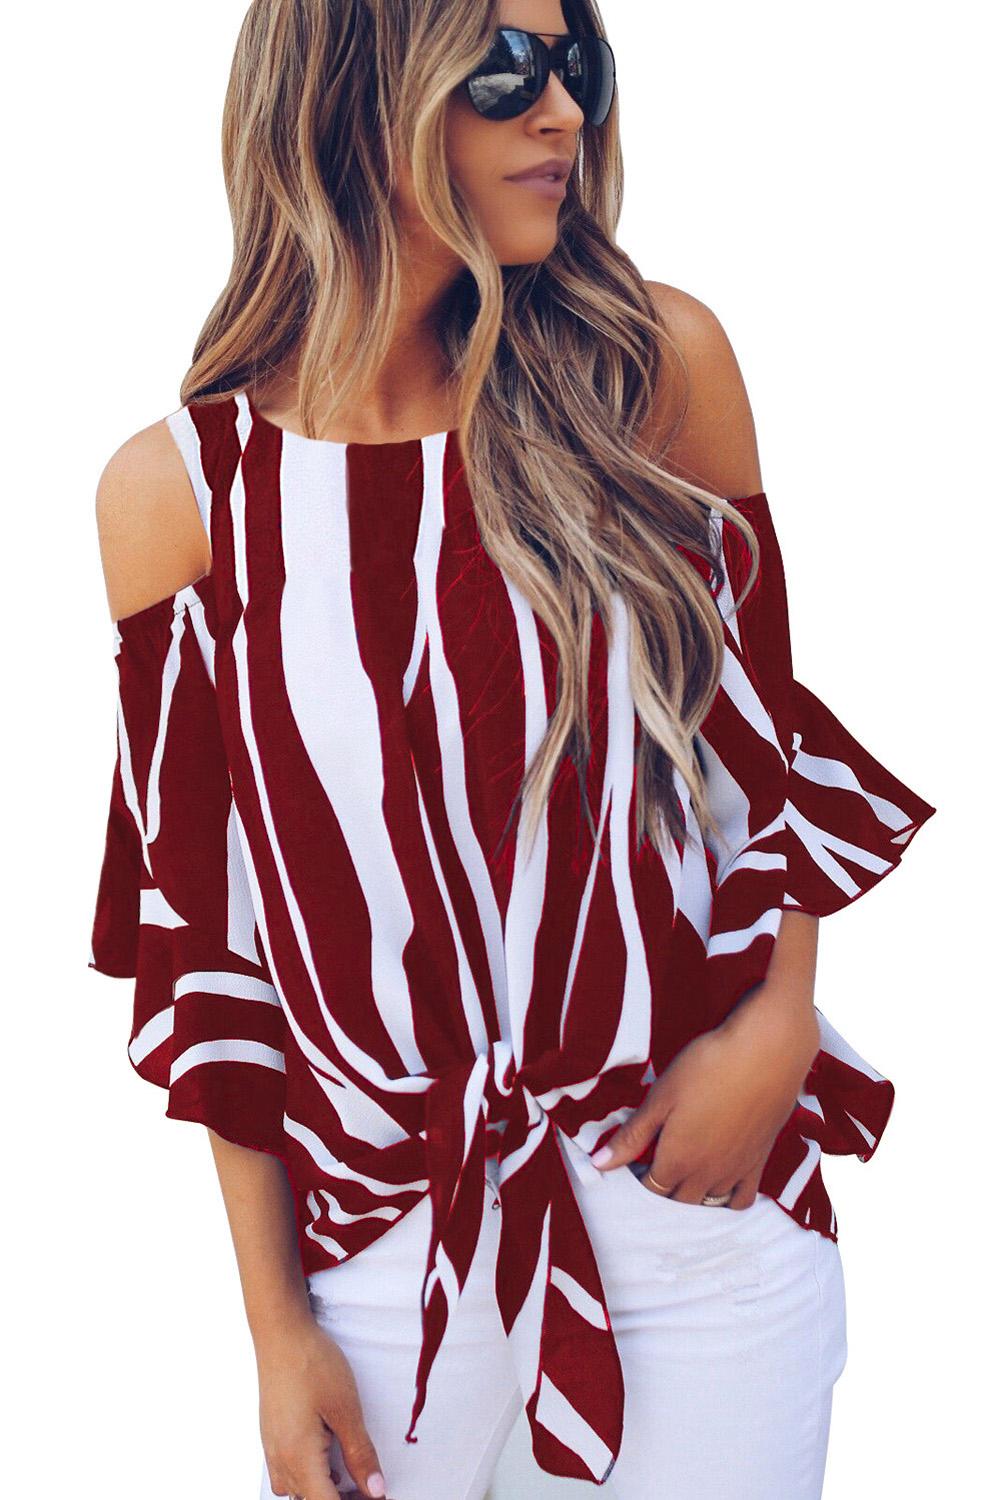 CoolooC Women’s Striped Off The Shoulder Tops 3 4 Flare Sleeve Tie Knot Blouses Shirts